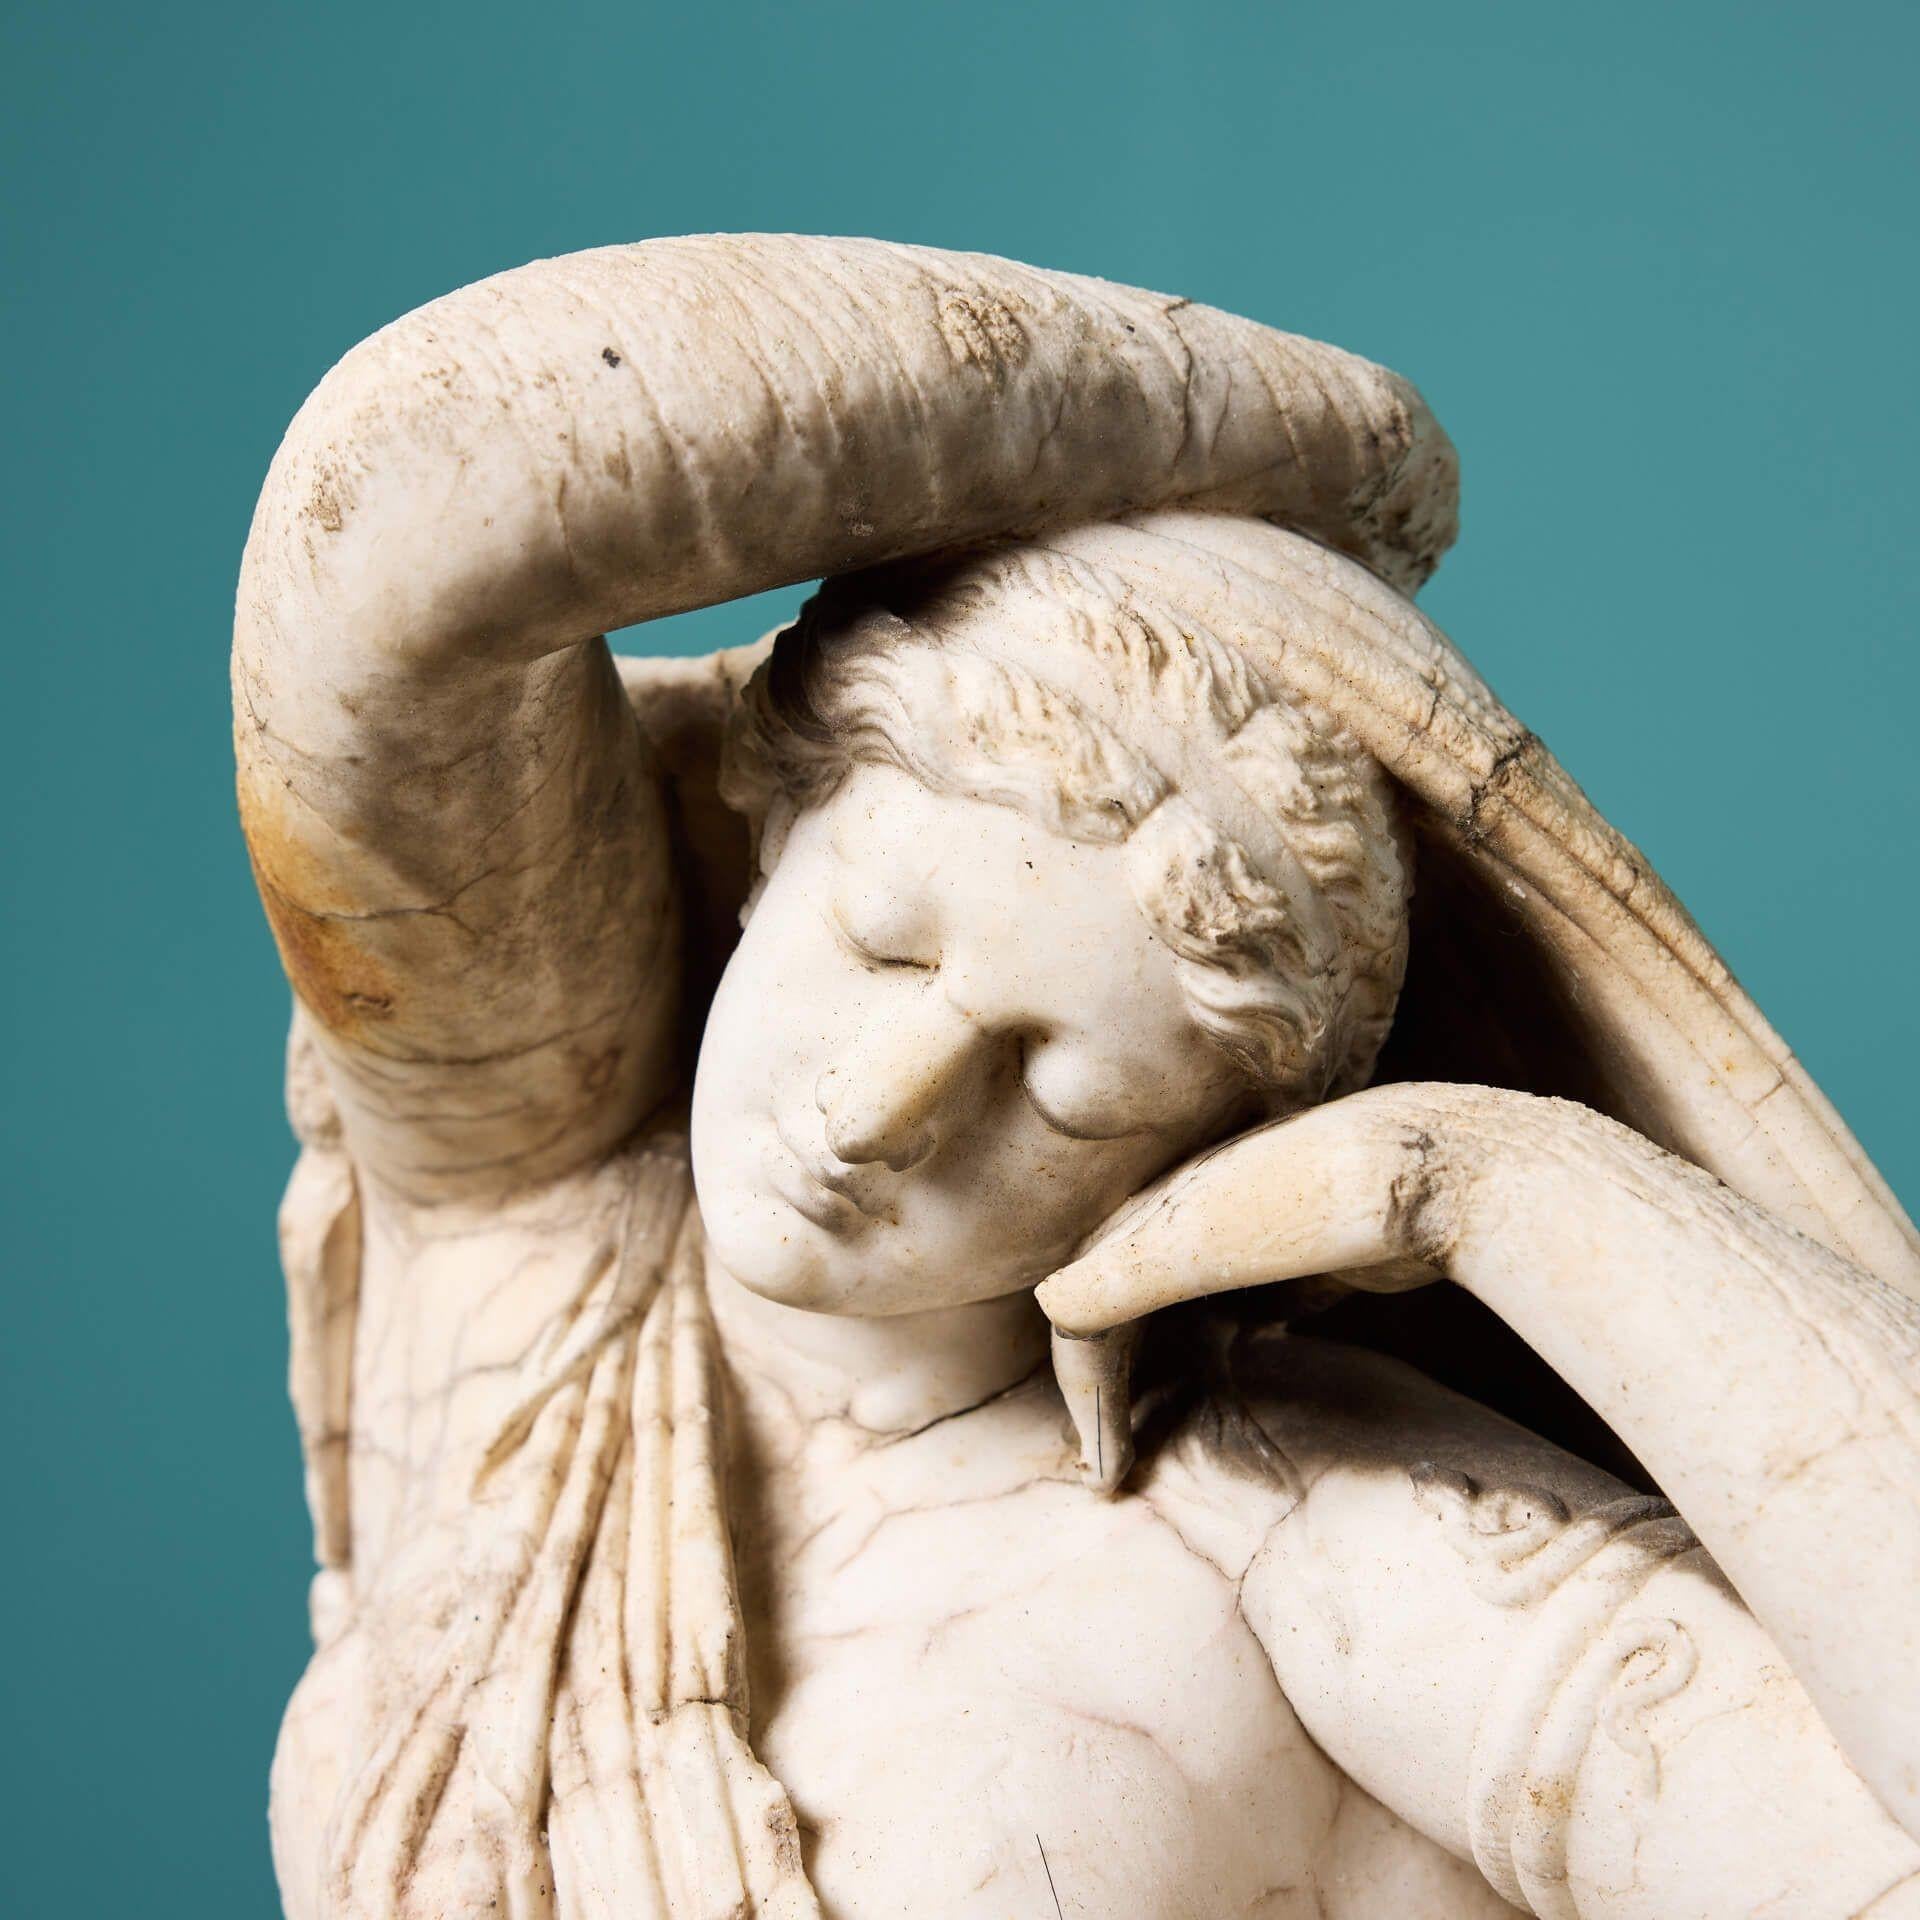 This late Georgian antique marble statue is after the antique, depicting a scale fragment of the eminent 2nd century statue ‘Sleeping Ariadne’. Circa 1780, this carved white marble sculpture is over 240 years old and depicts Ariadne’s torso as she